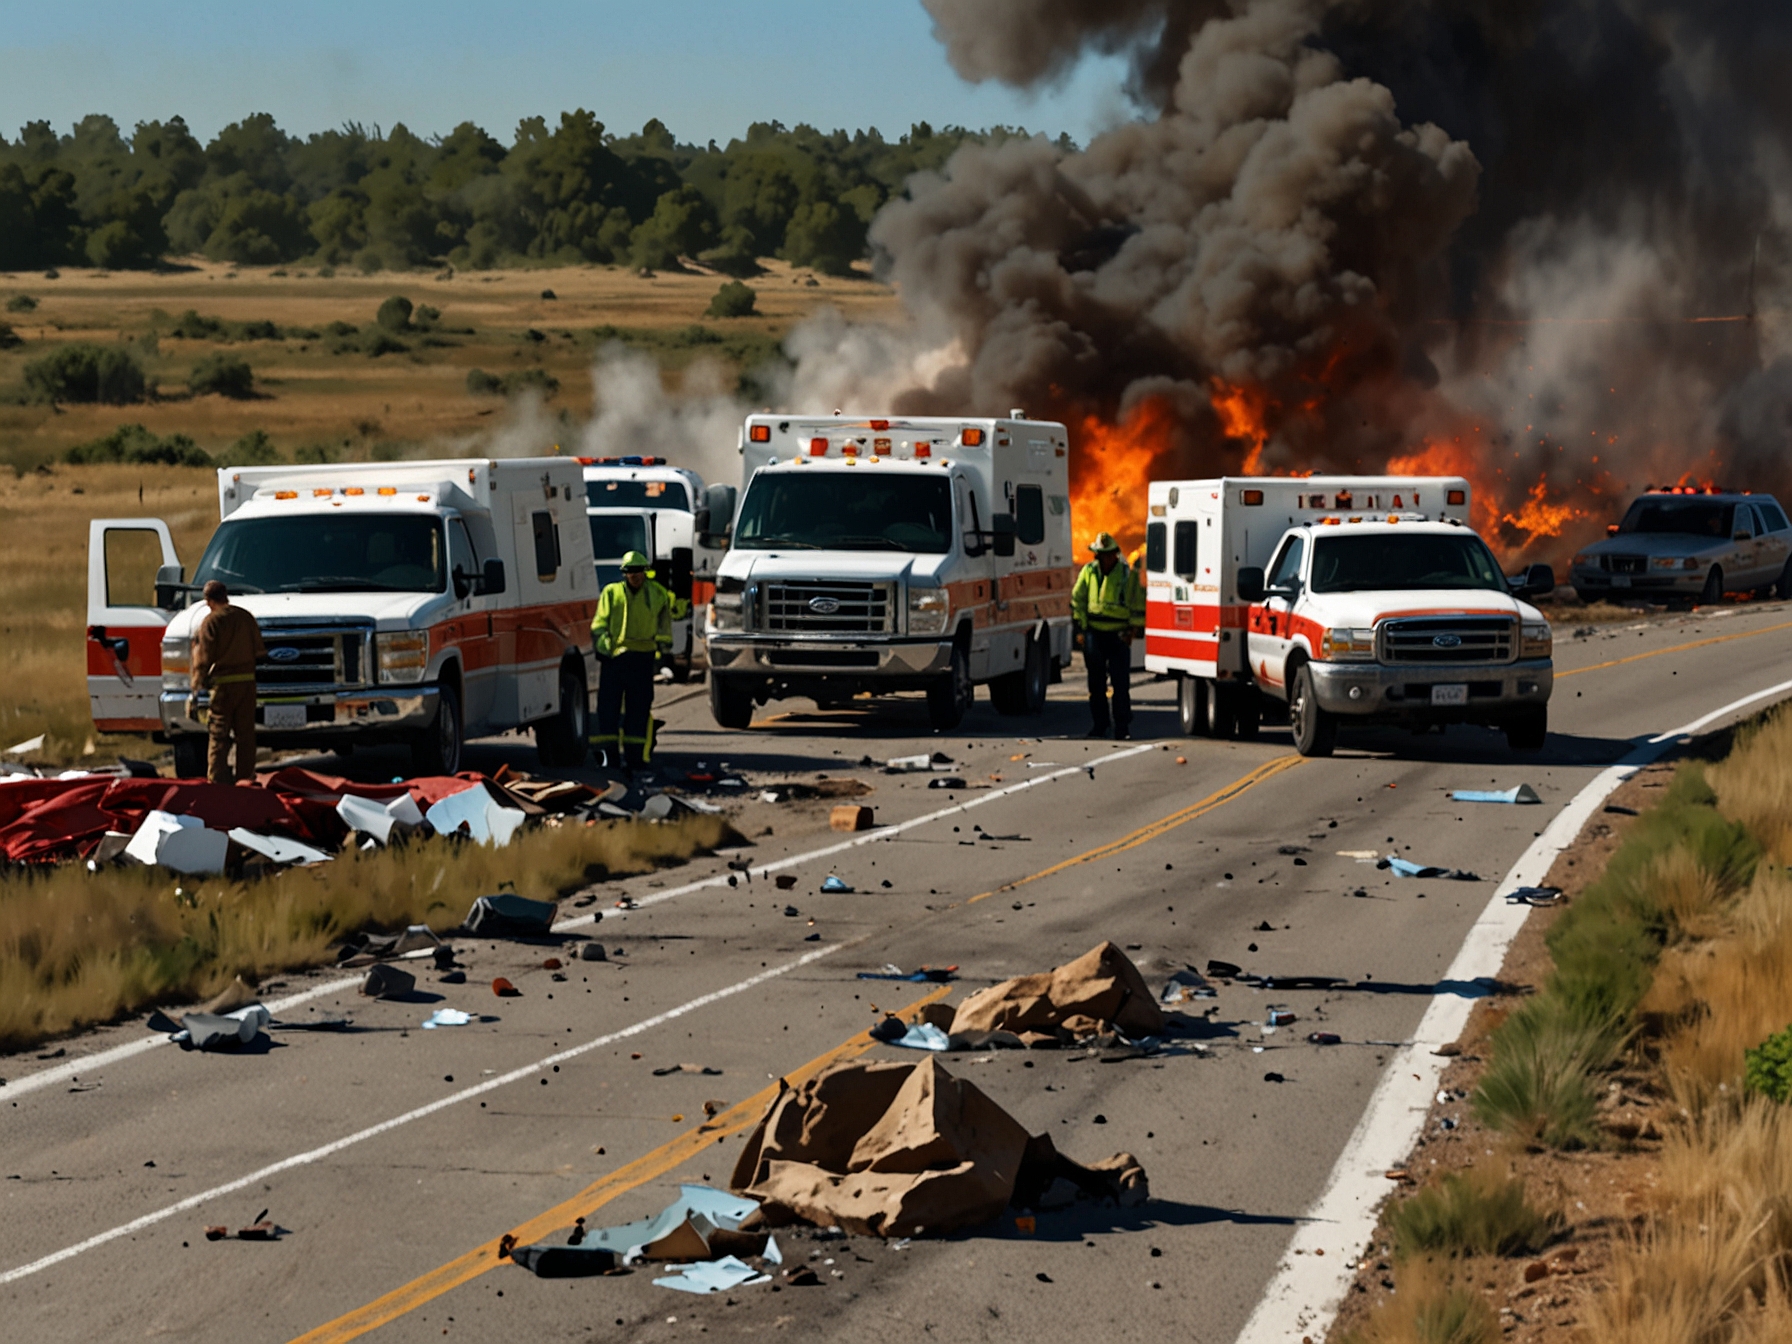 Emergency responders at the crash site of the Tecnam P2006T along Interstate 25, working amid debris to secure the area and provide aid. Traffic is visibly disrupted by the event.